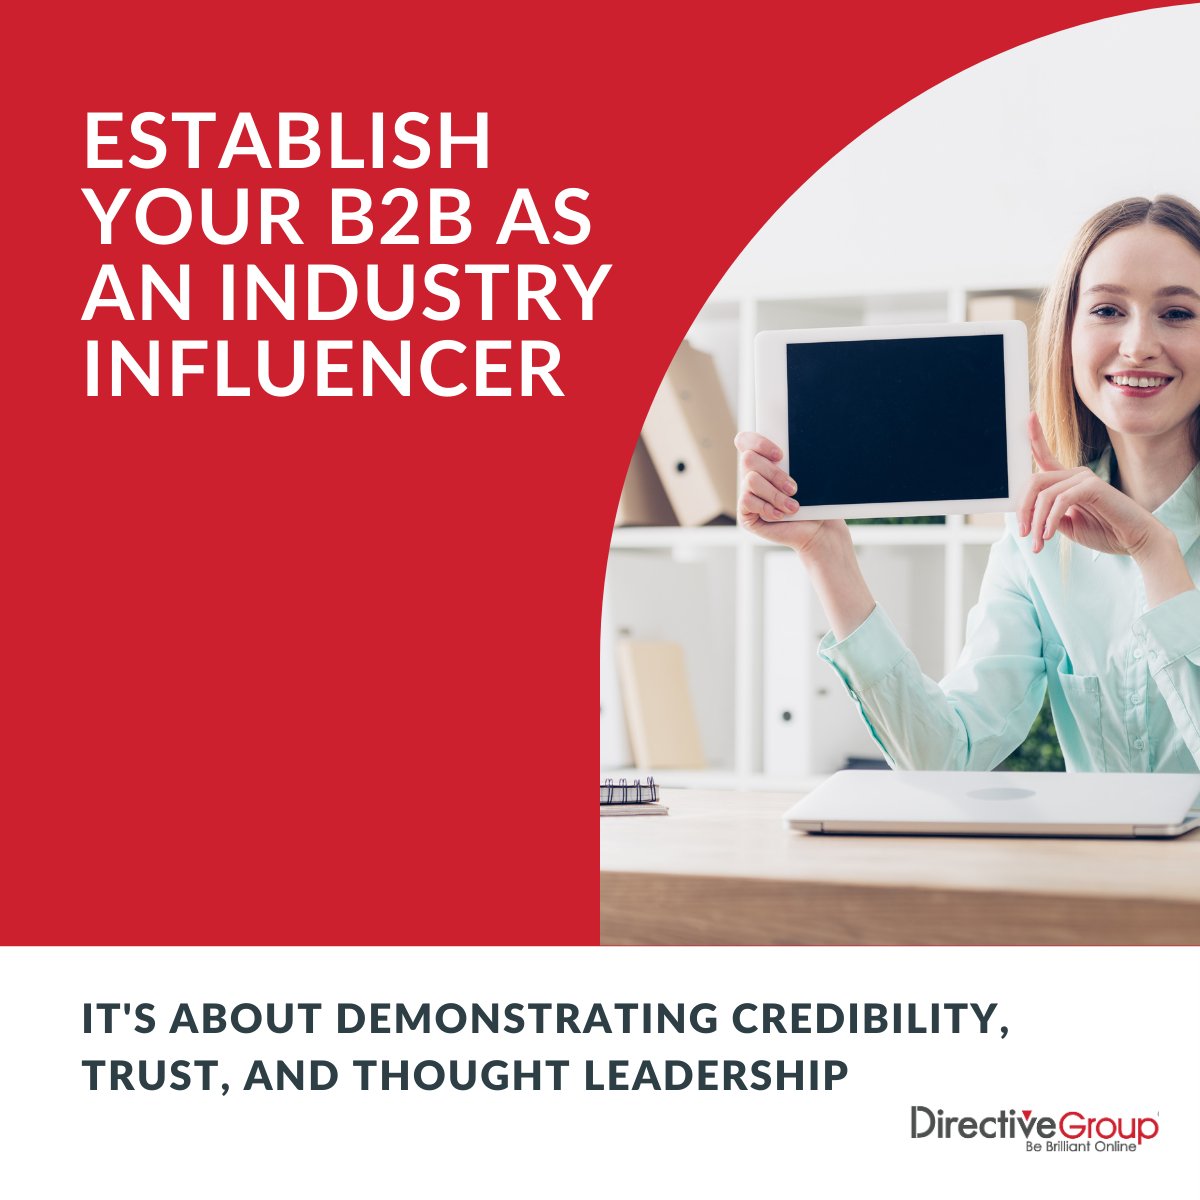 Looking to establish your B2B as an influencer in today’s fast-paced digital world? 1. Leverage your content. 2. Host live sessions with Q&As. 3. Collaborate with thought leaders. 🚀 Let’s connect to elevate your influence today! #B2BInfluencer #DigitalMarketing